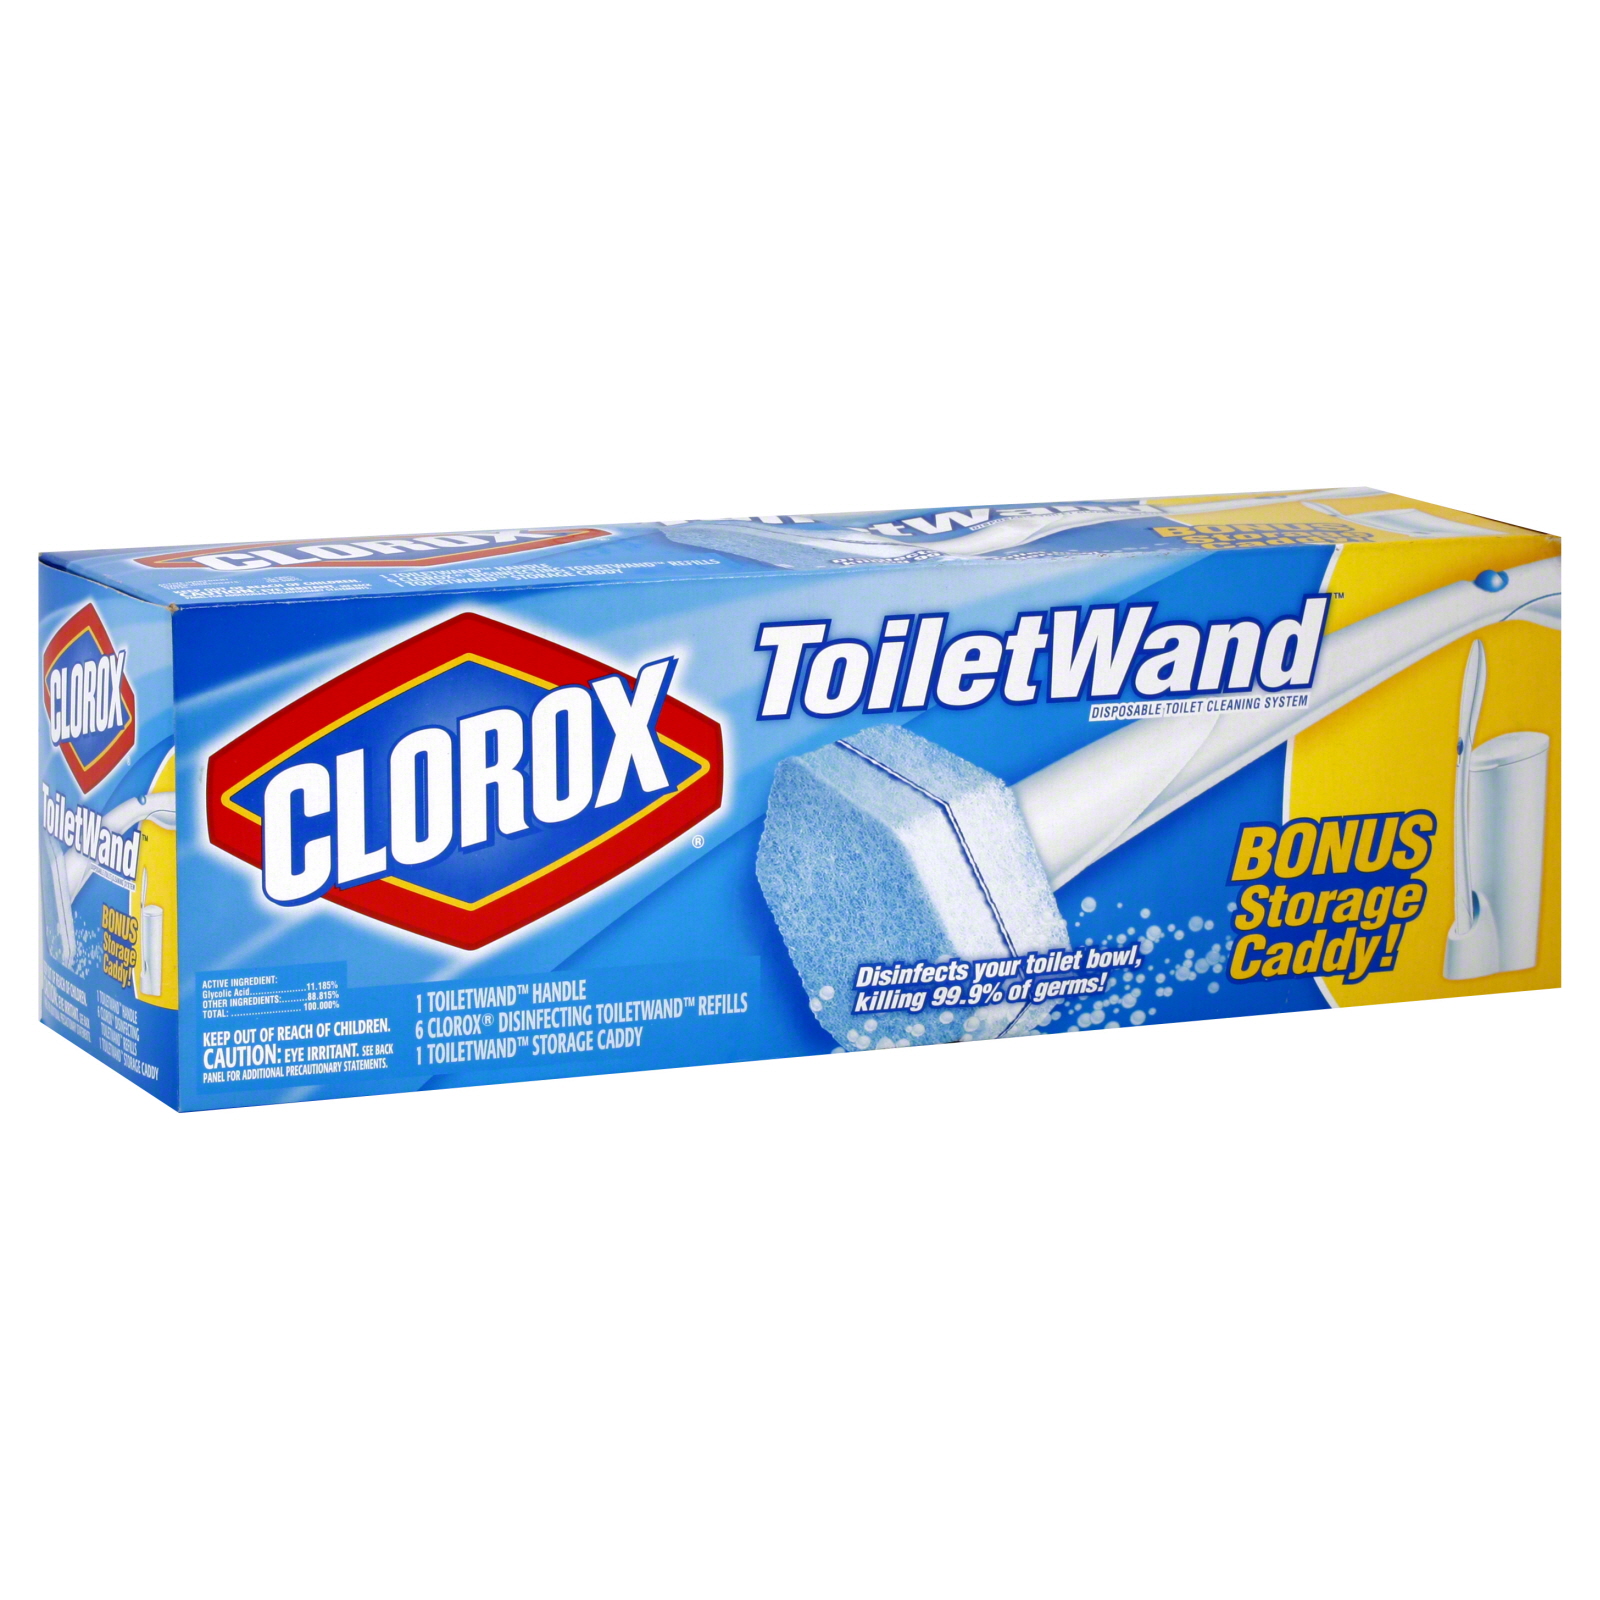 Clorox Toilet Cleaning System, Disposable, ToiletWand, 1 system